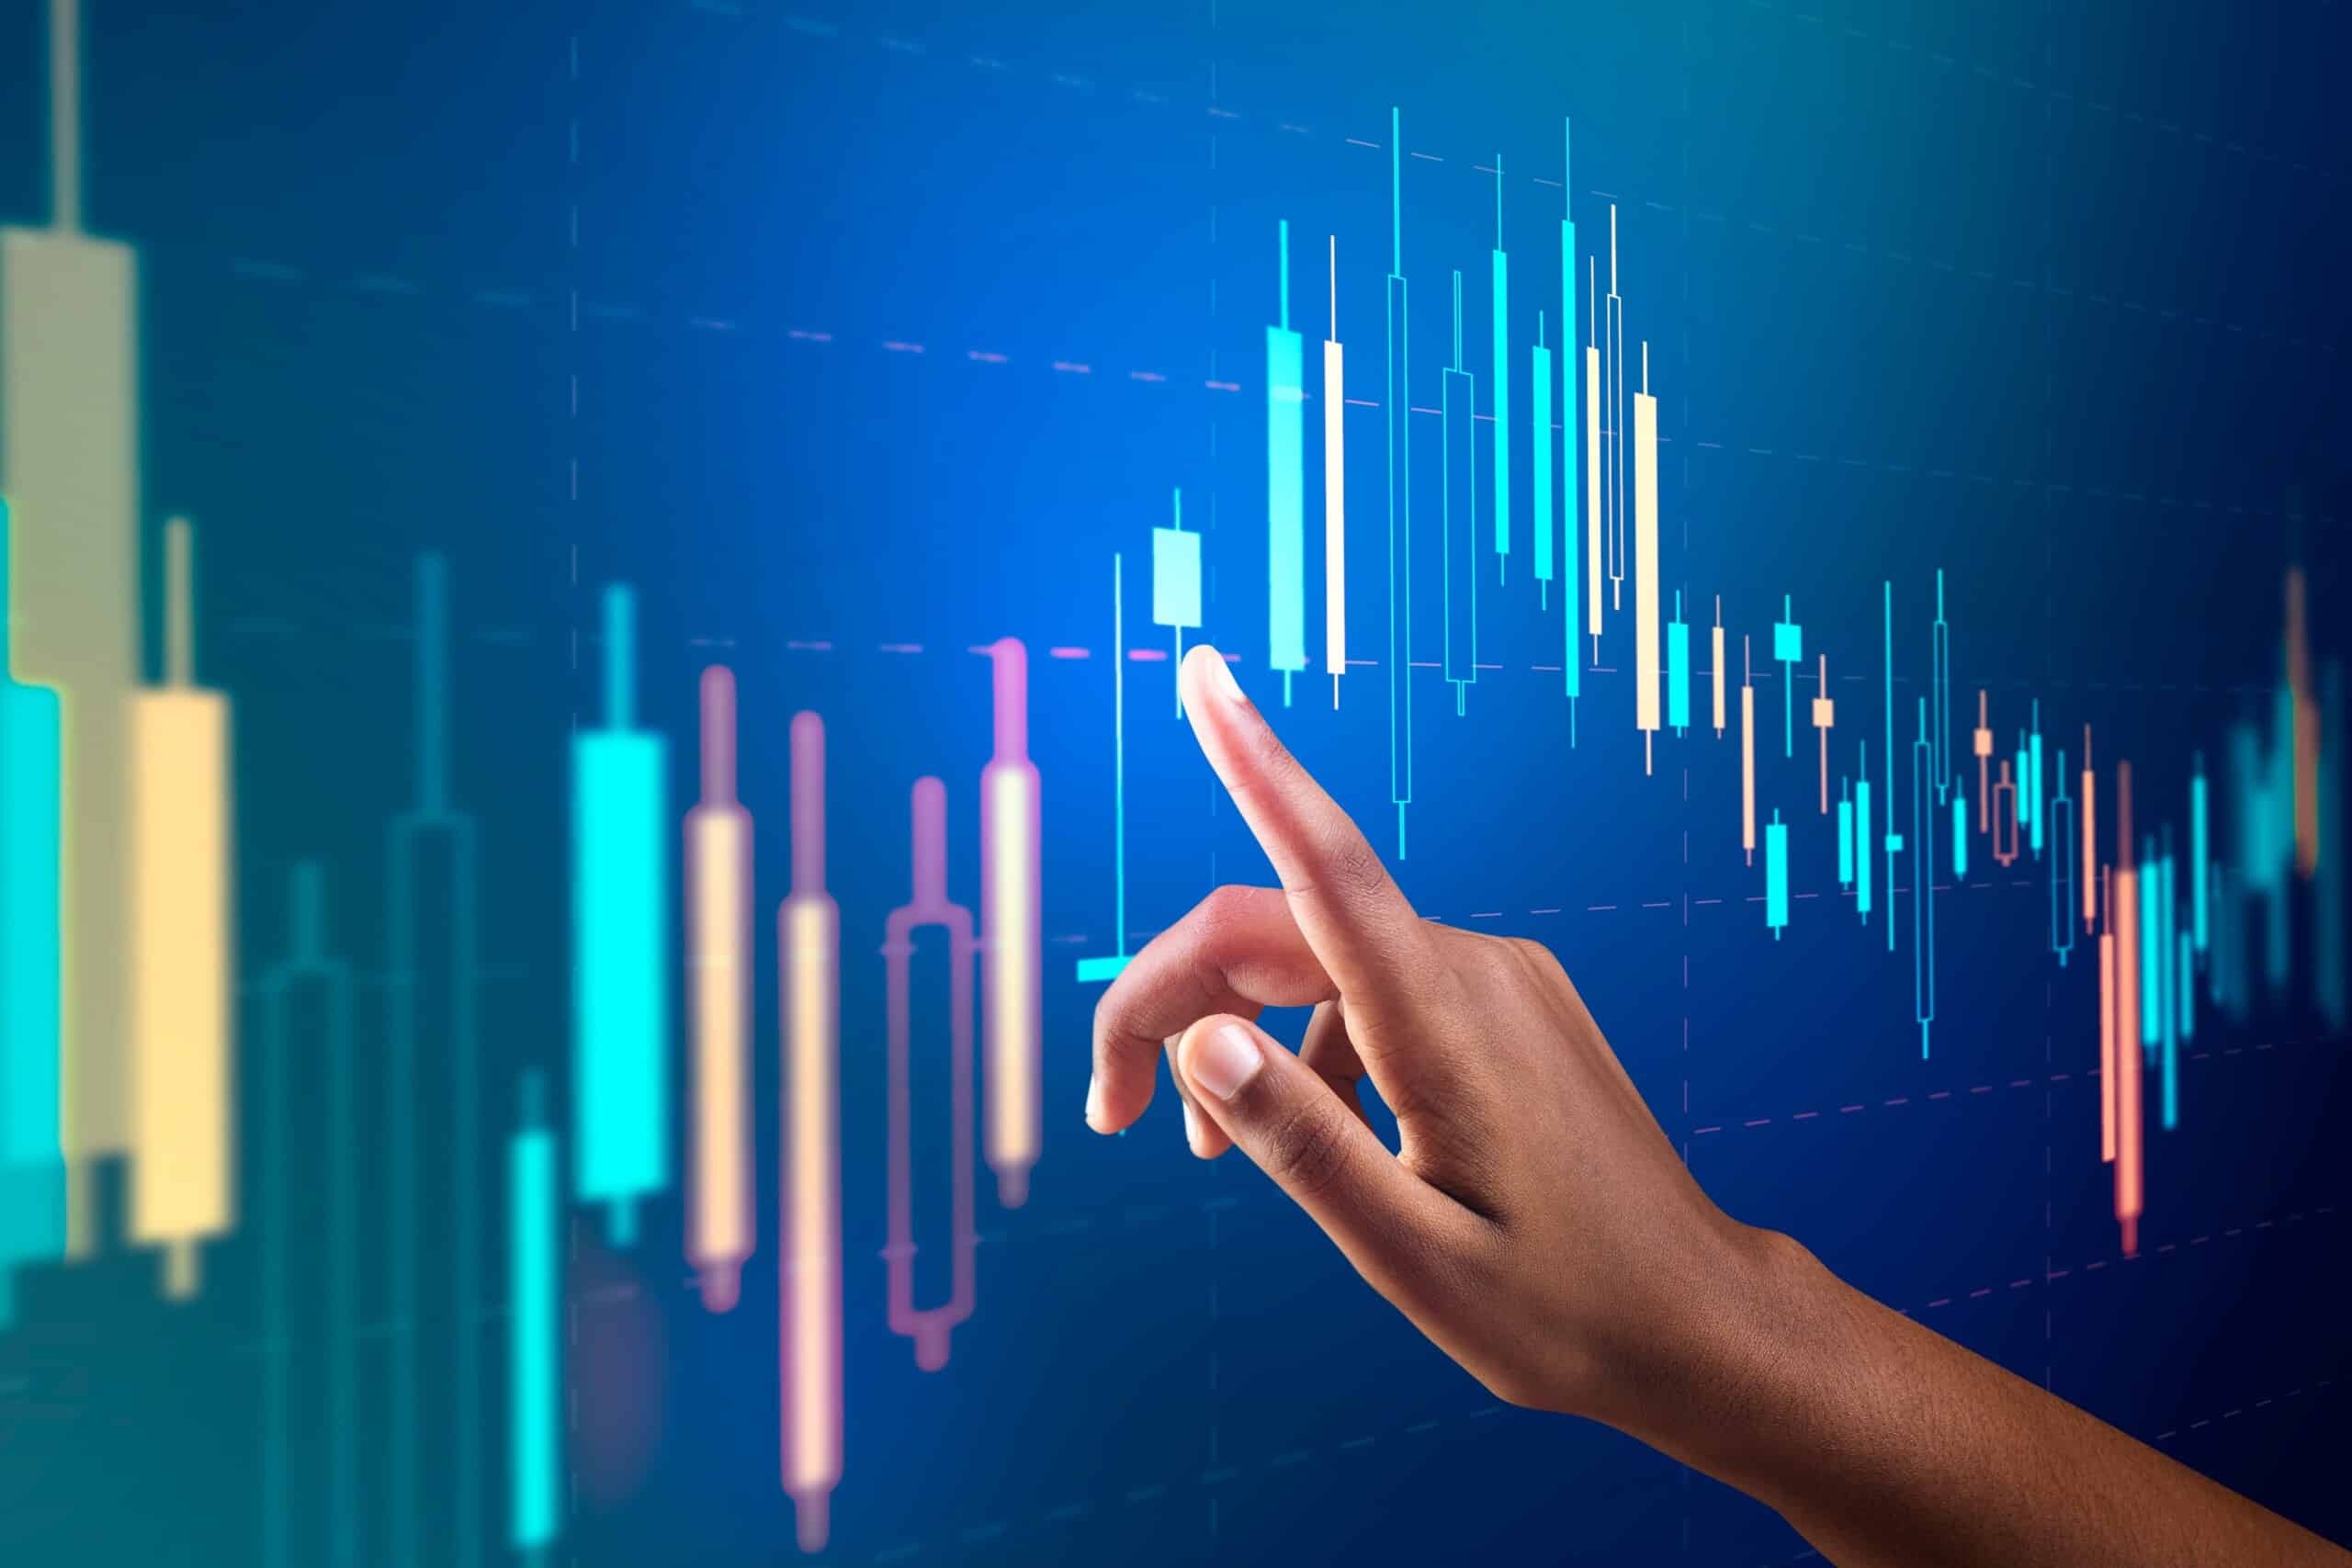 A hand from a global company is pointing at an innovative stock chart on a blue background.